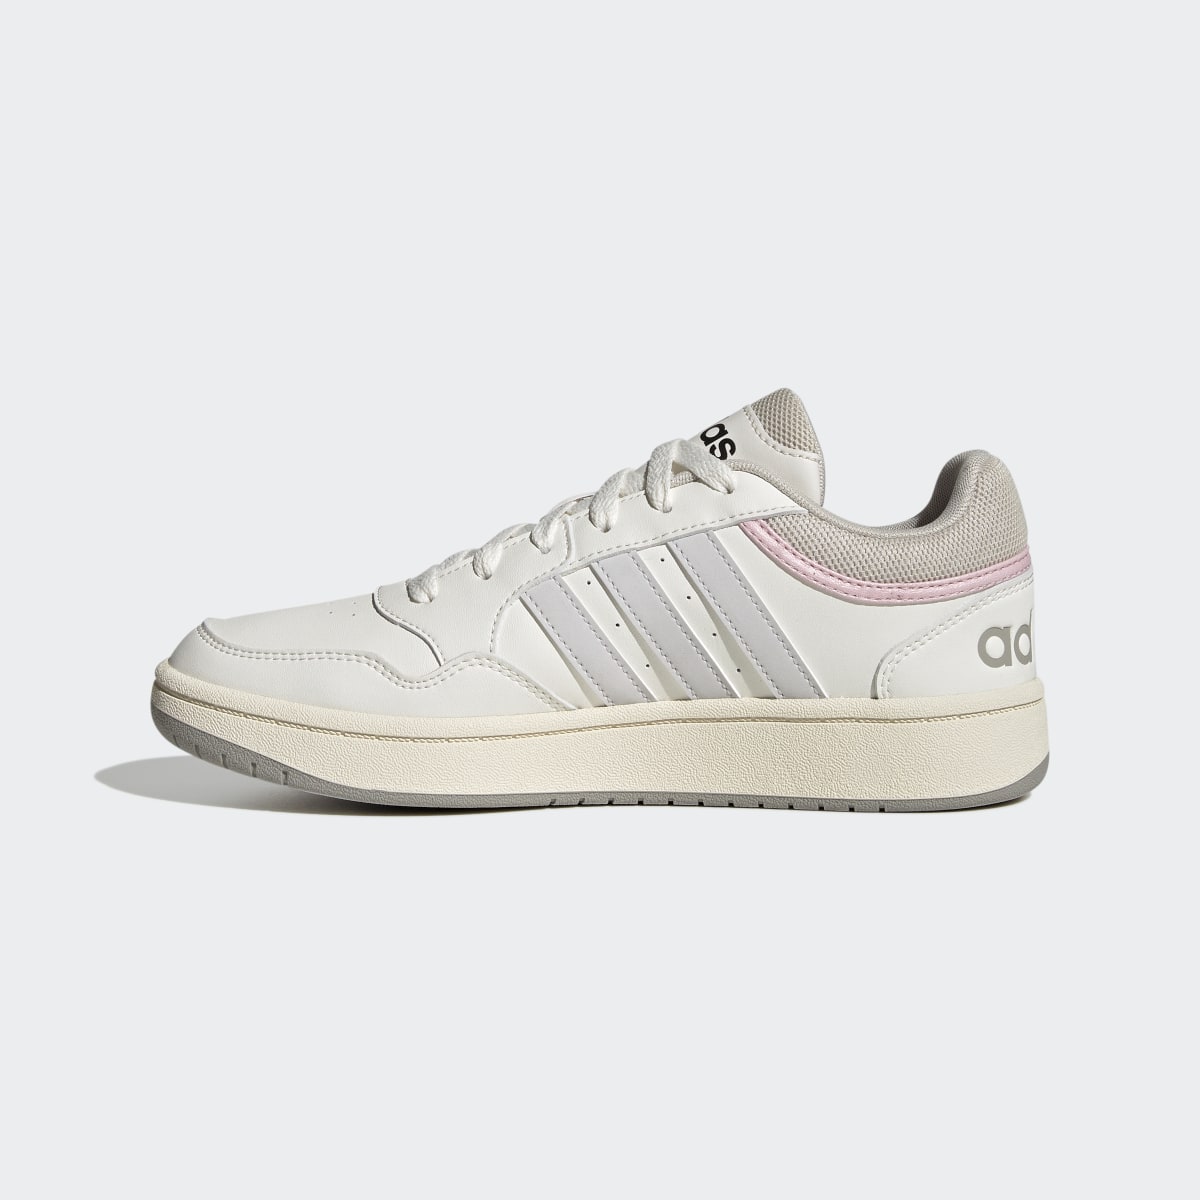 Adidas Hoops 3.0 Mid Lifestyle Basketball Low Schuh. 7